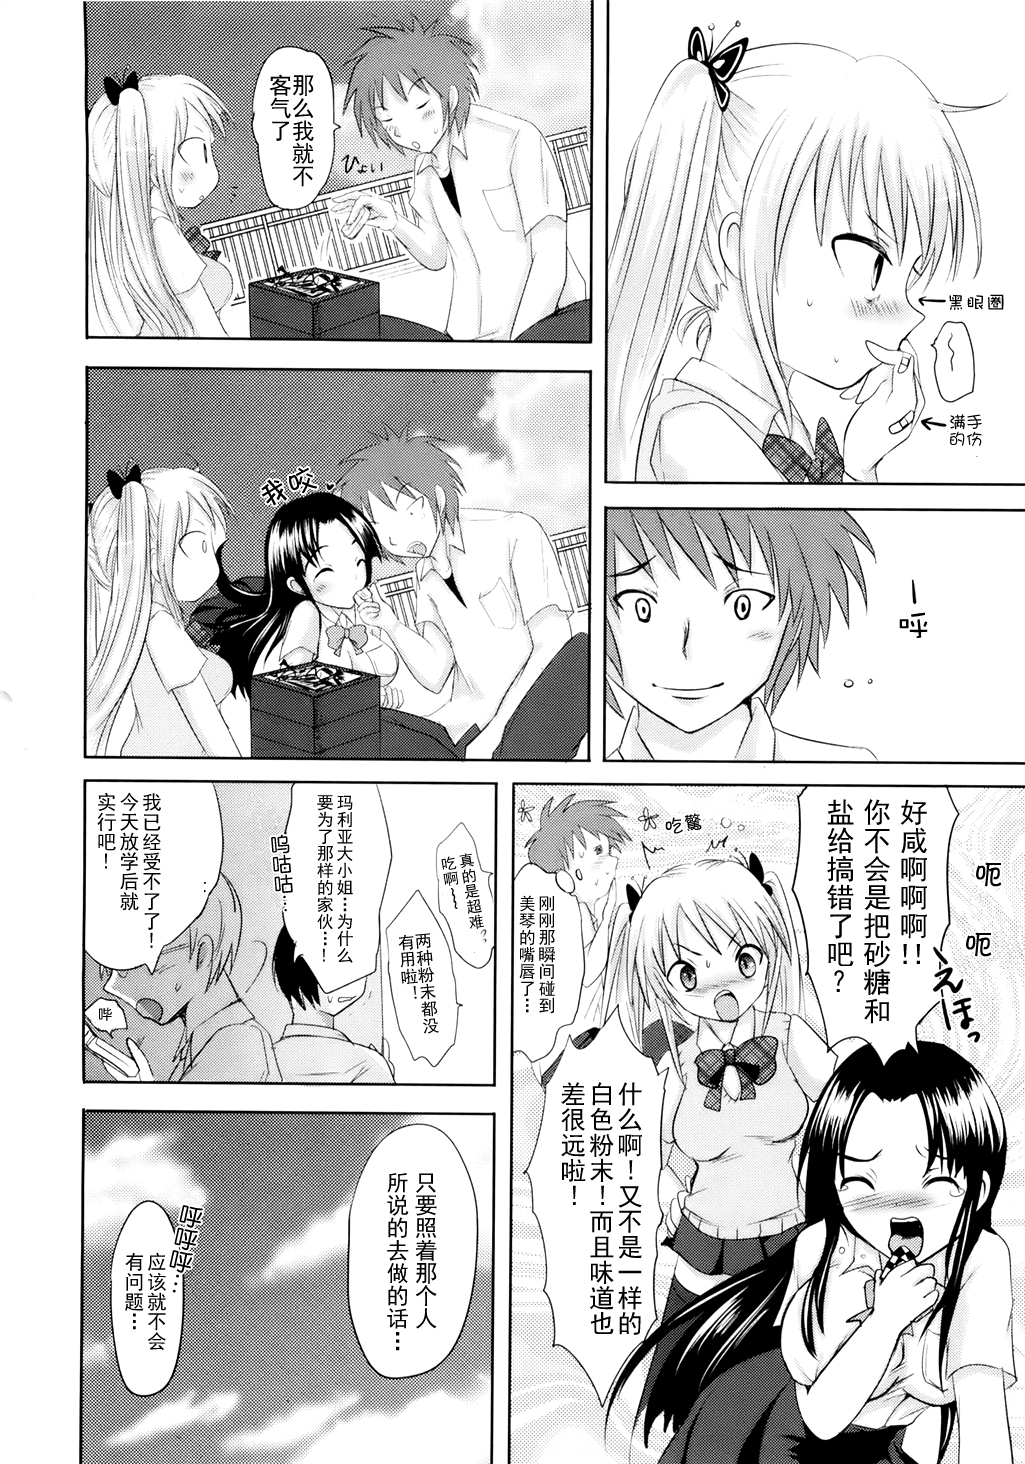 [Natsume Fumika] Sundere! Ch.4 [Chinese] [夏目文花] スンデレ! CH4[中文翻譯]